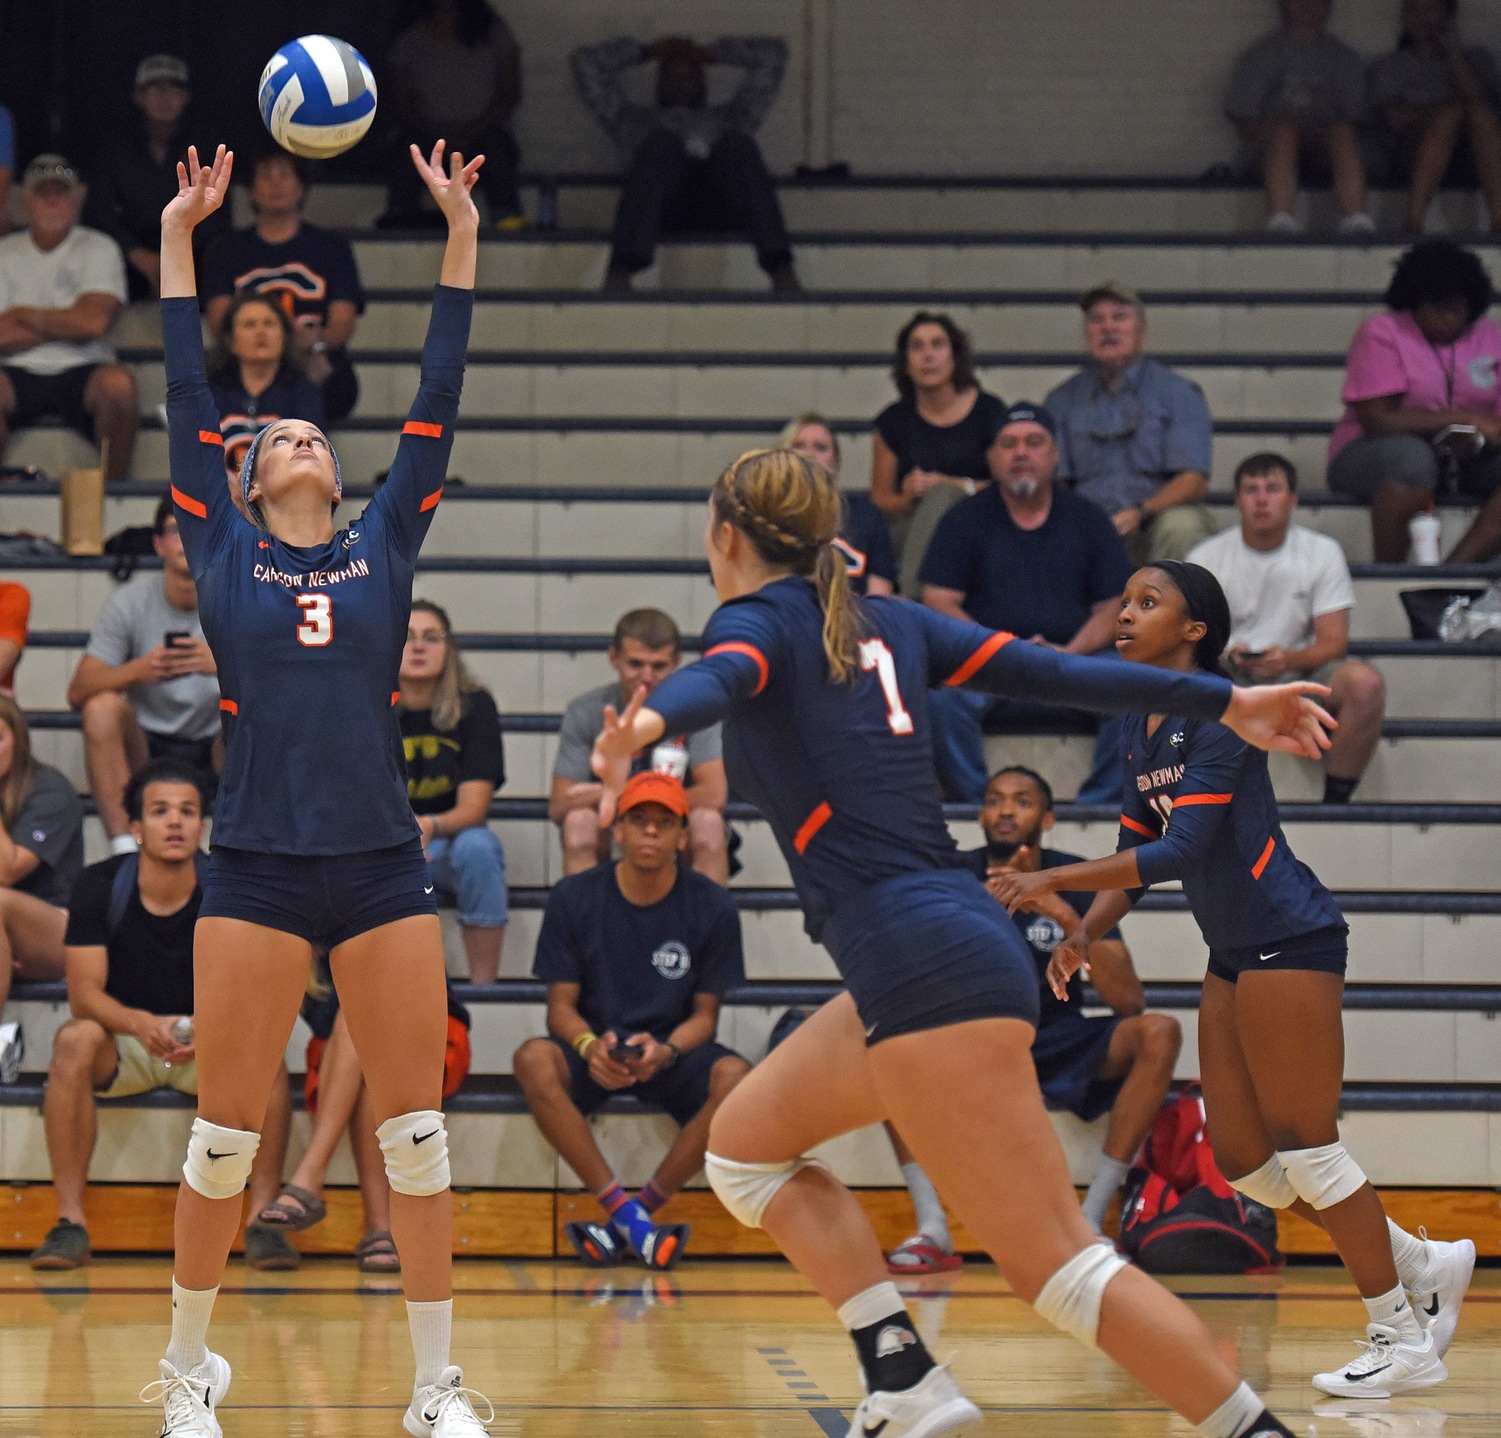 Bulldogs down Eagles in straight sets